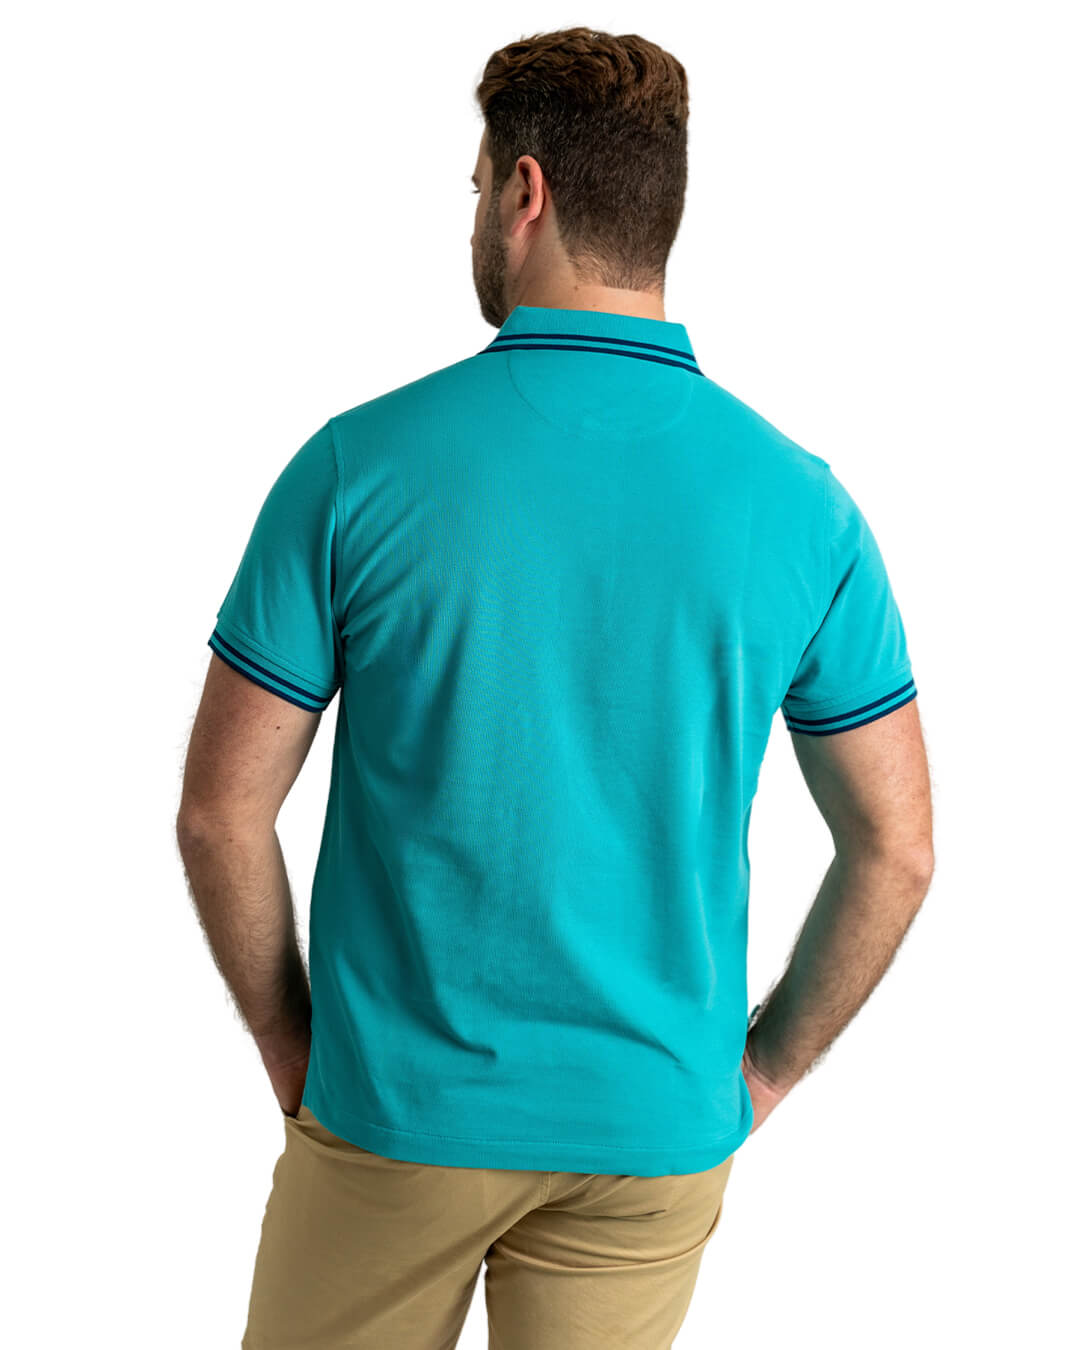 Teal Pique Polo Shirt With Double Tipped Collar & Cuff